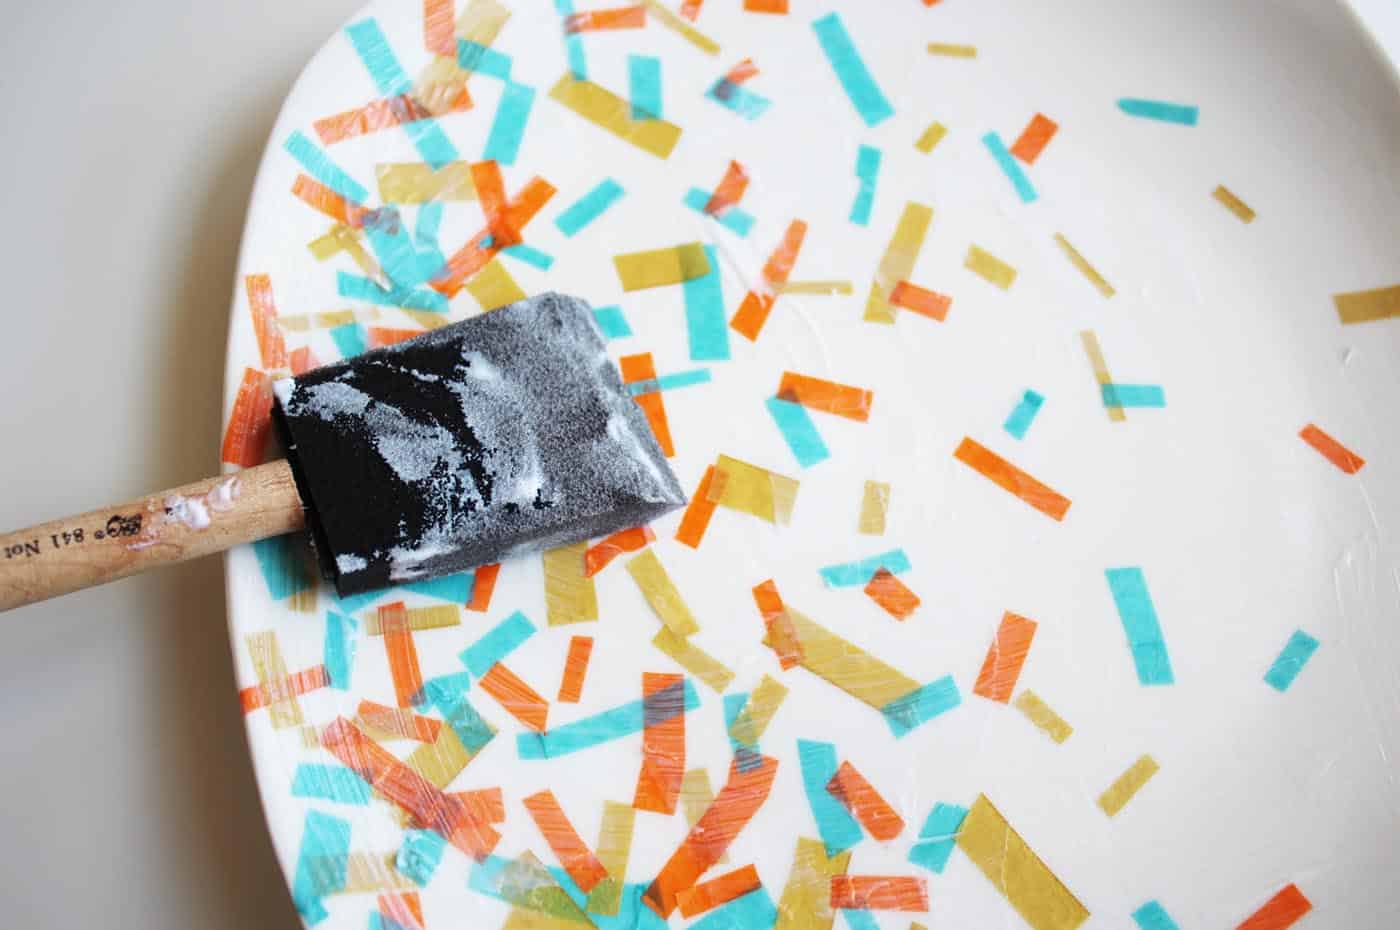 Brushing a layer of Dishwasher Safe Mod Podge over confetti on a dollar store plate